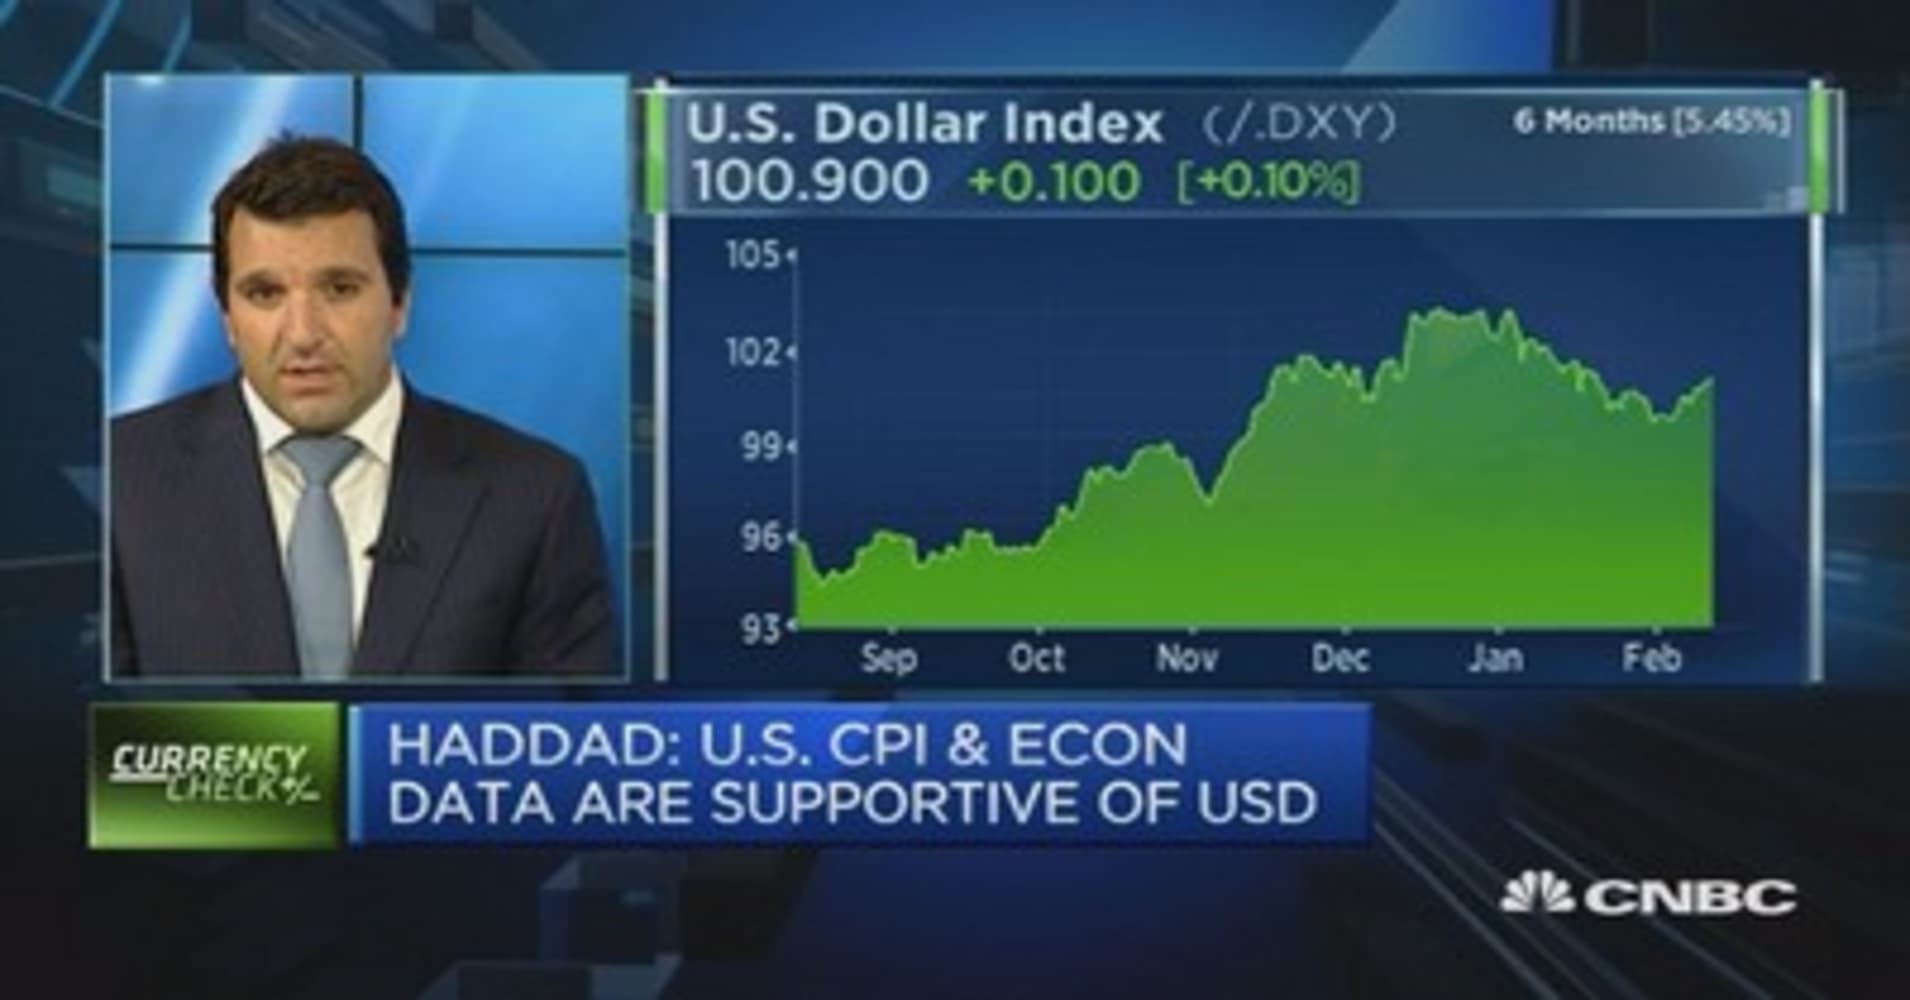 USD strength to continue: Strategist